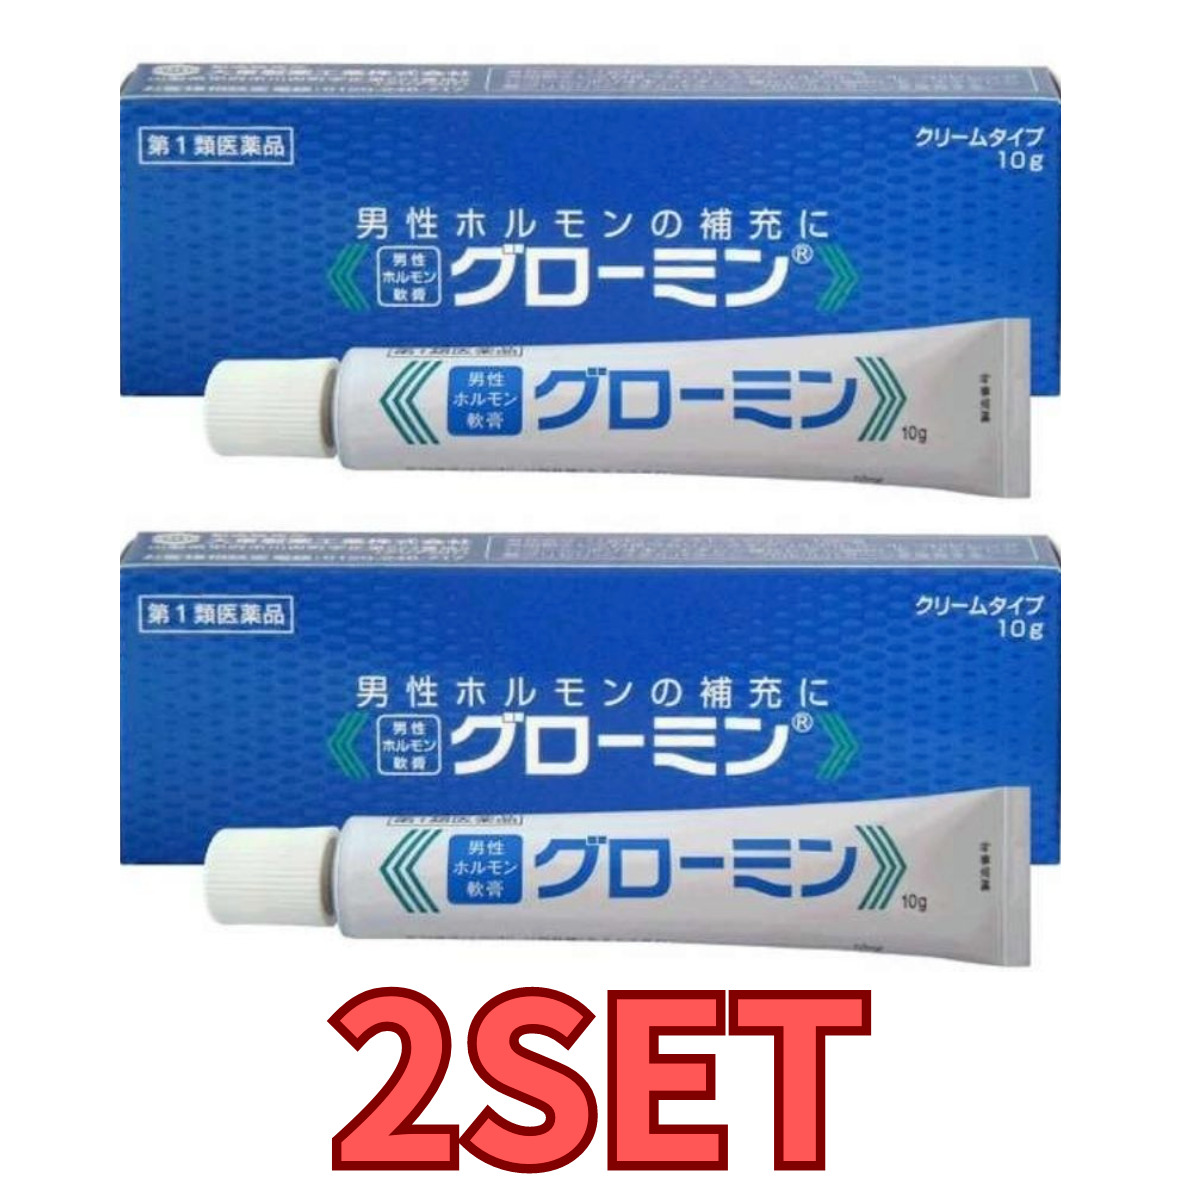 Guromin Testosterone 10mg Creme Type Male Hormone Medical Cream set of 2 New